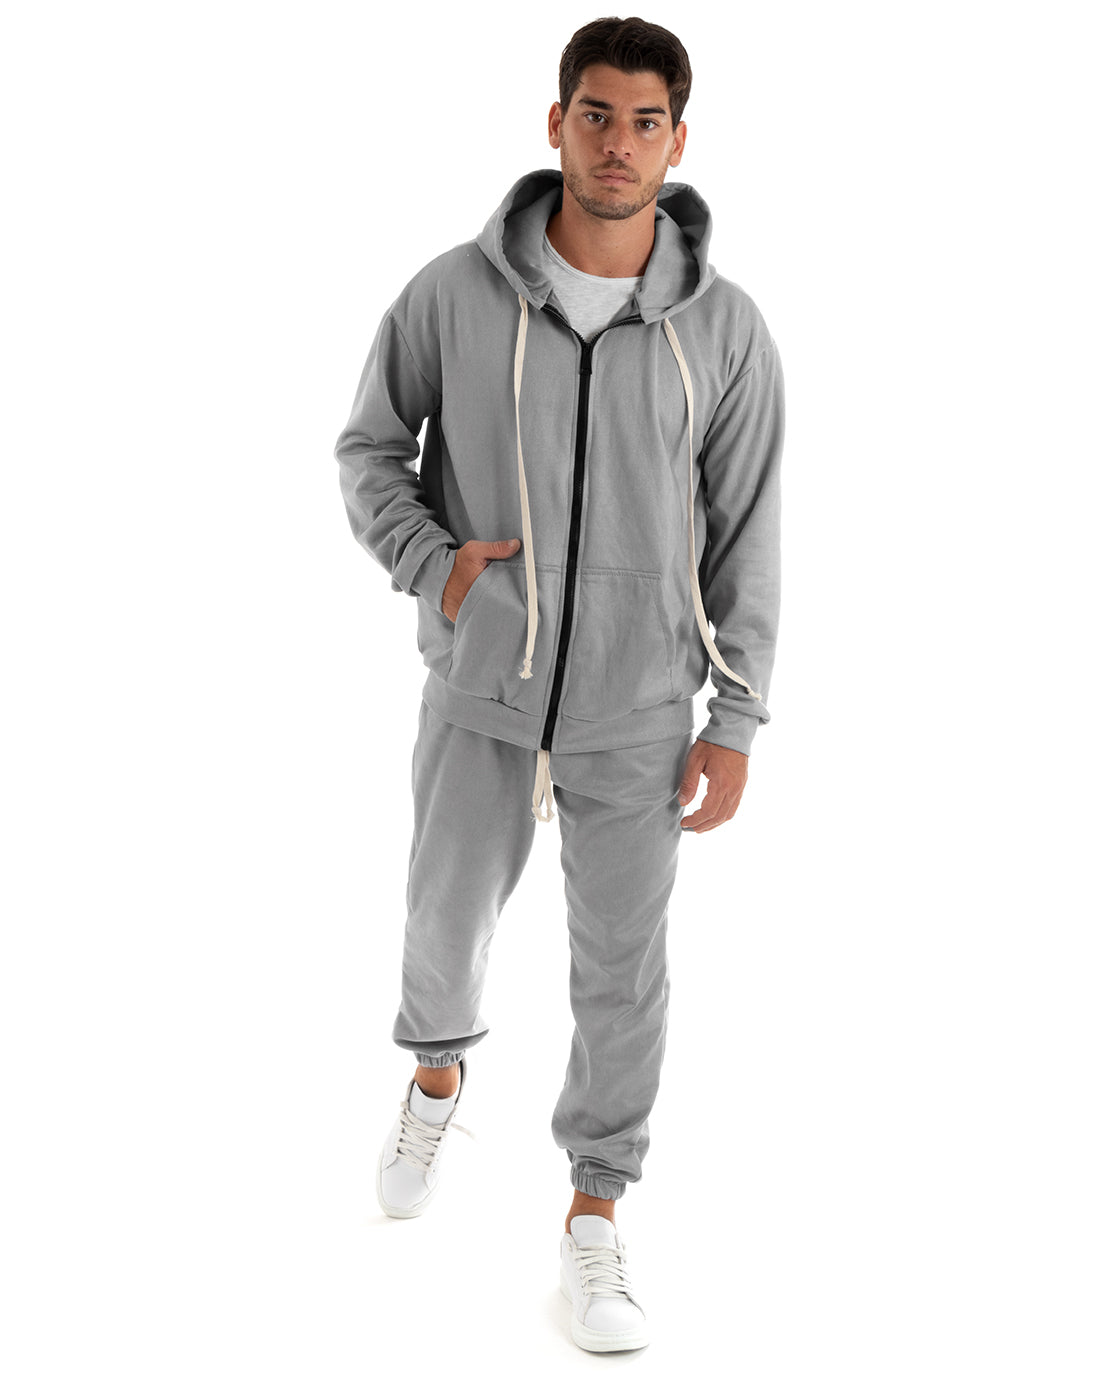 Men's Tracksuit Set, Hooded Sweatshirt and Zip Trousers with Drawstring Waist in Light Gray Eco Suede GIOSAL-OU2399A